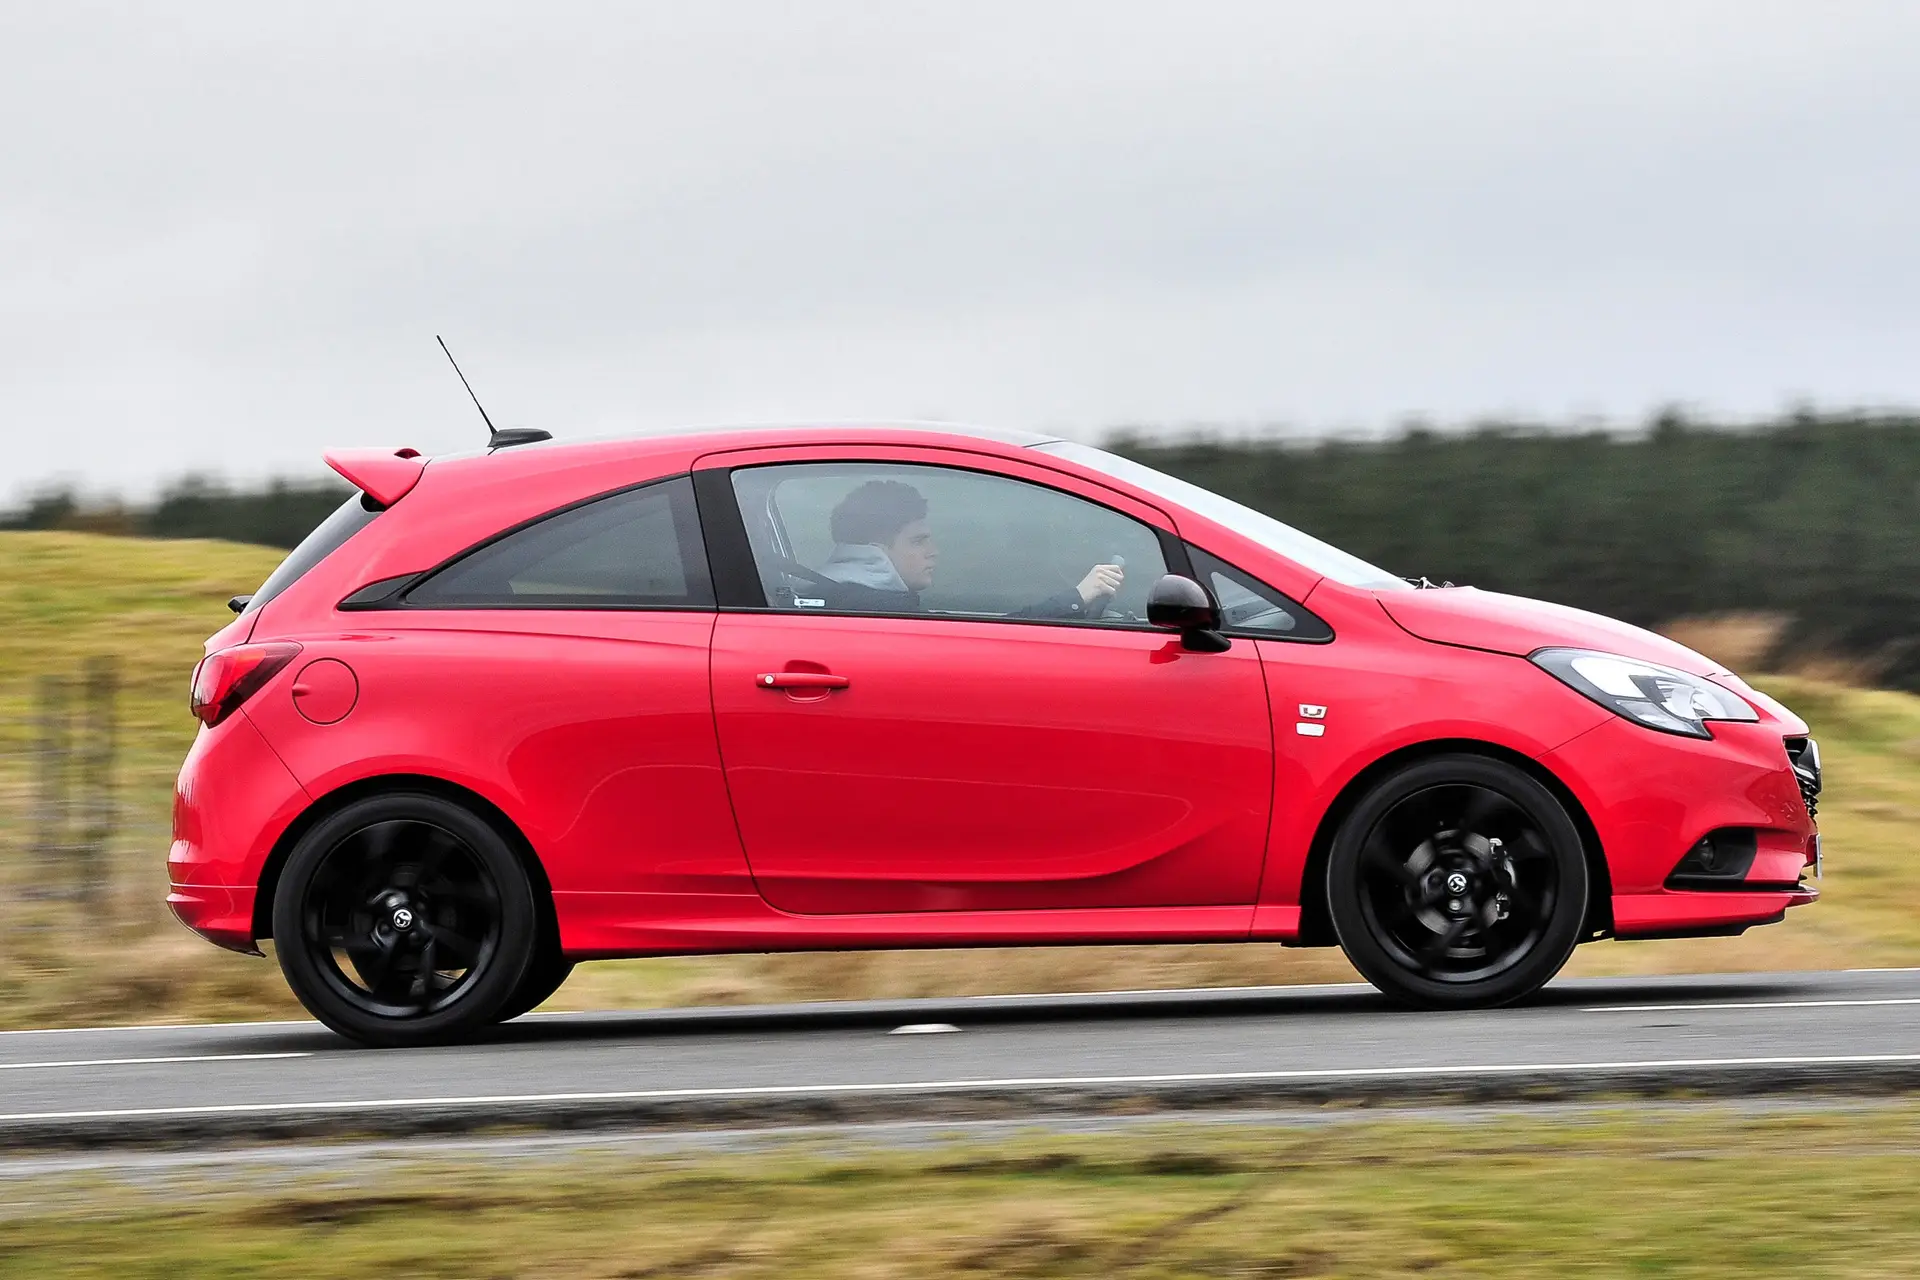 Used Vauxhall Corsa (2014-2019) Review: exterior side photo of the Vauxhall Corsa on the road